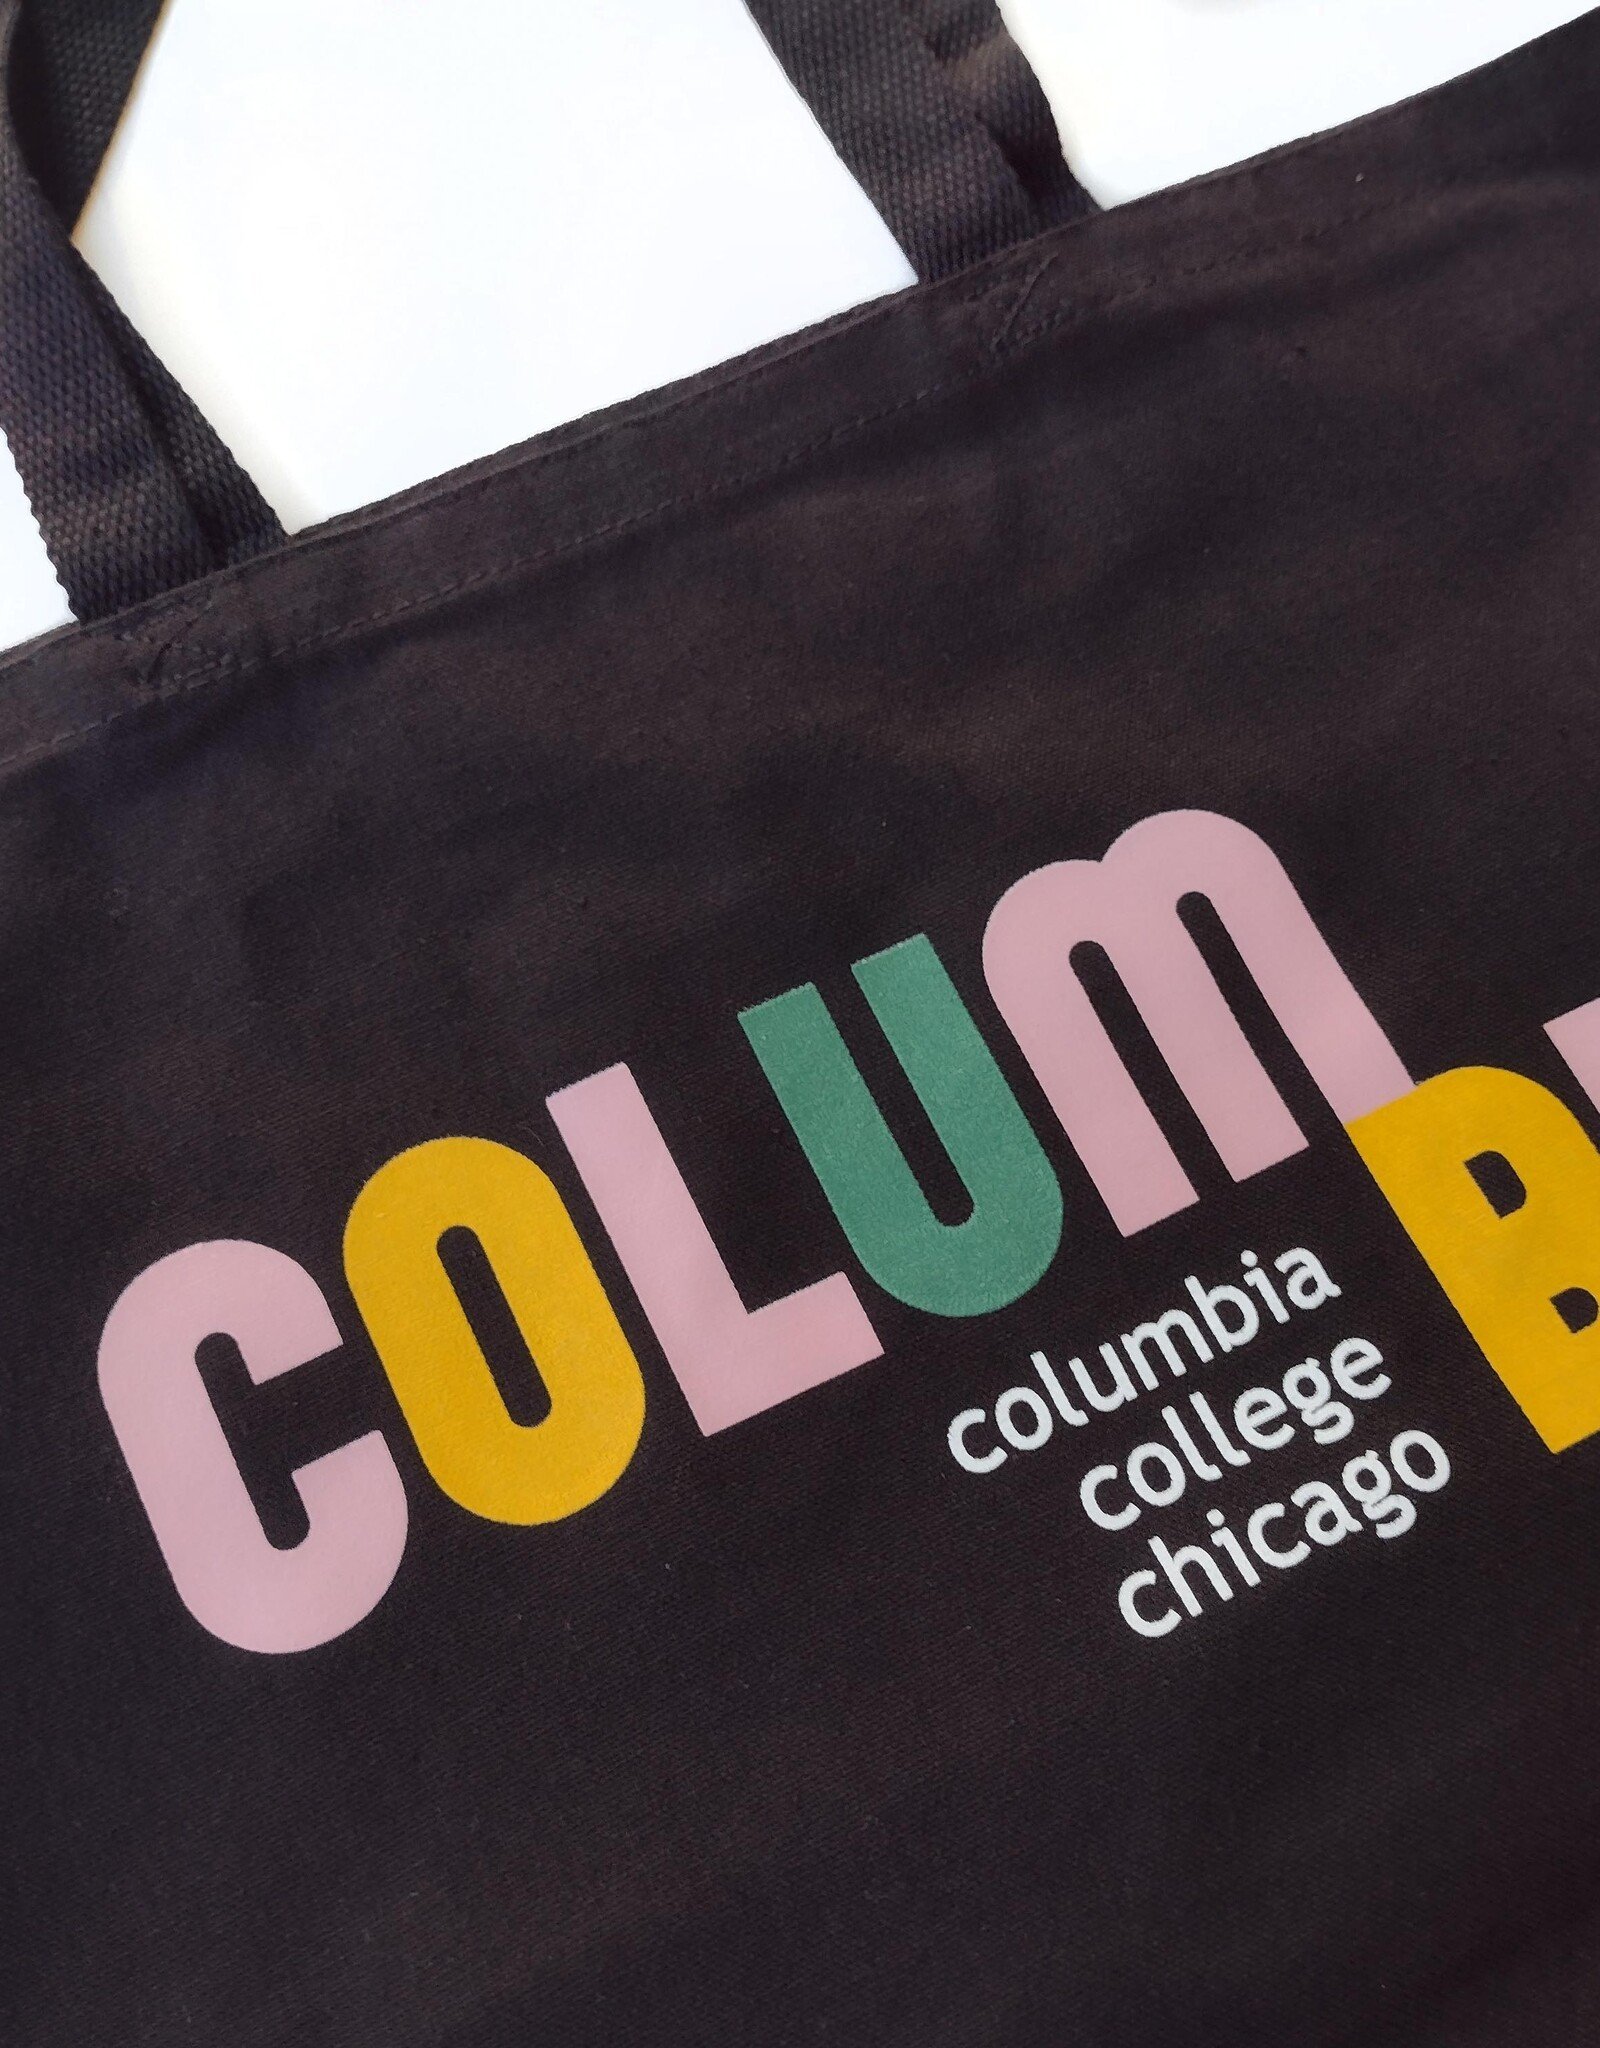 Buy Columbia, By Columbia Columbia College Chicago Black Canvas Tote